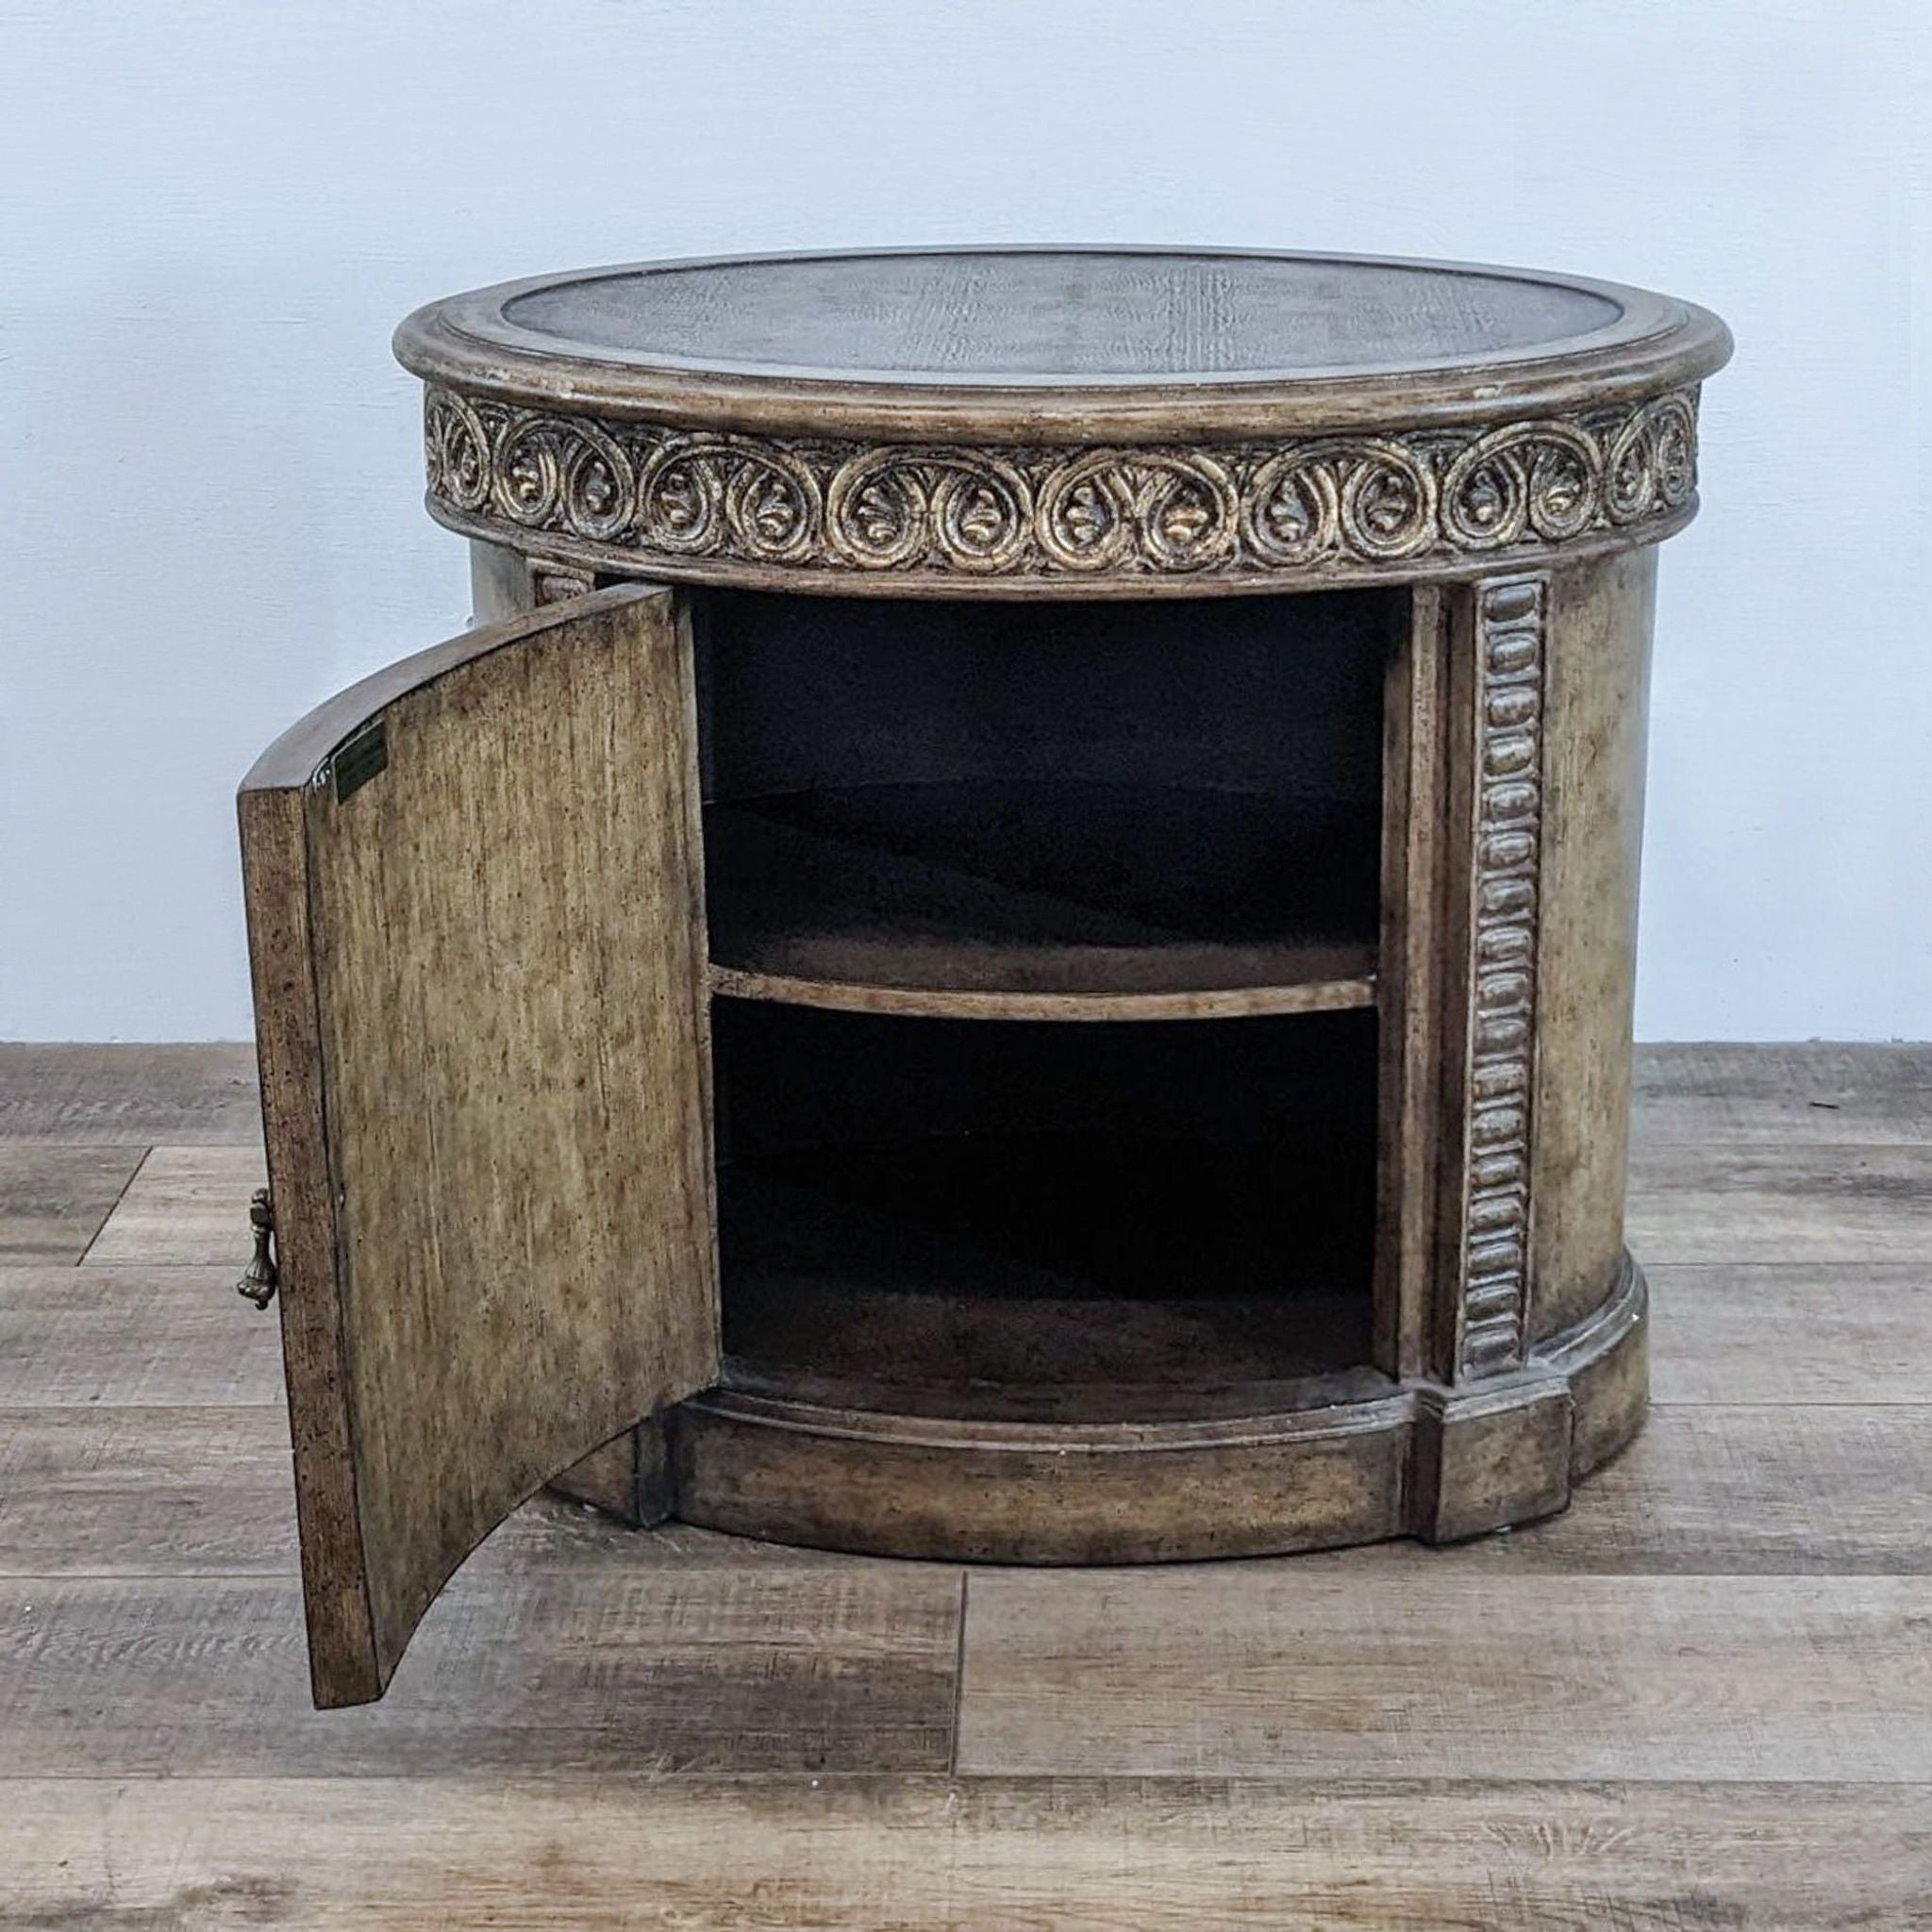 Pair of The Platt Collection end tables with a distressed finish, showcasing carved details and craftsmanship.